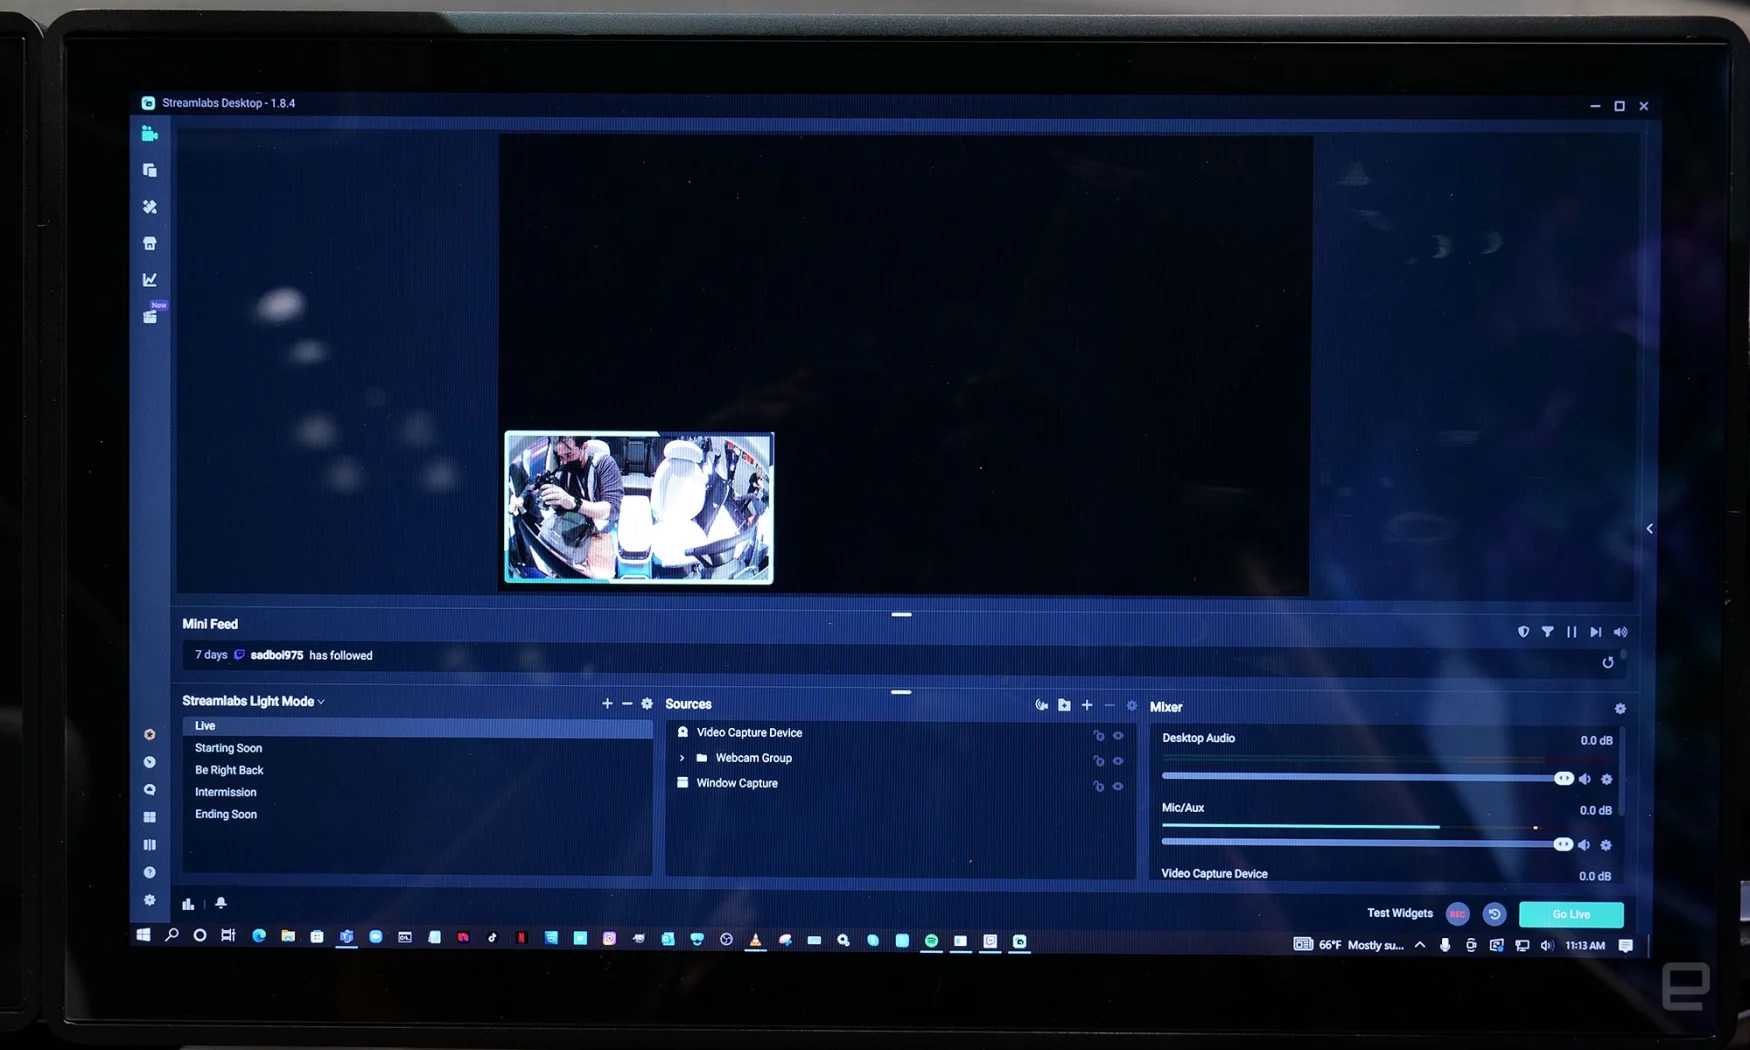 The Indi One's Windows-based computer allows users to install practically any app they want, including live streaming software and games. 